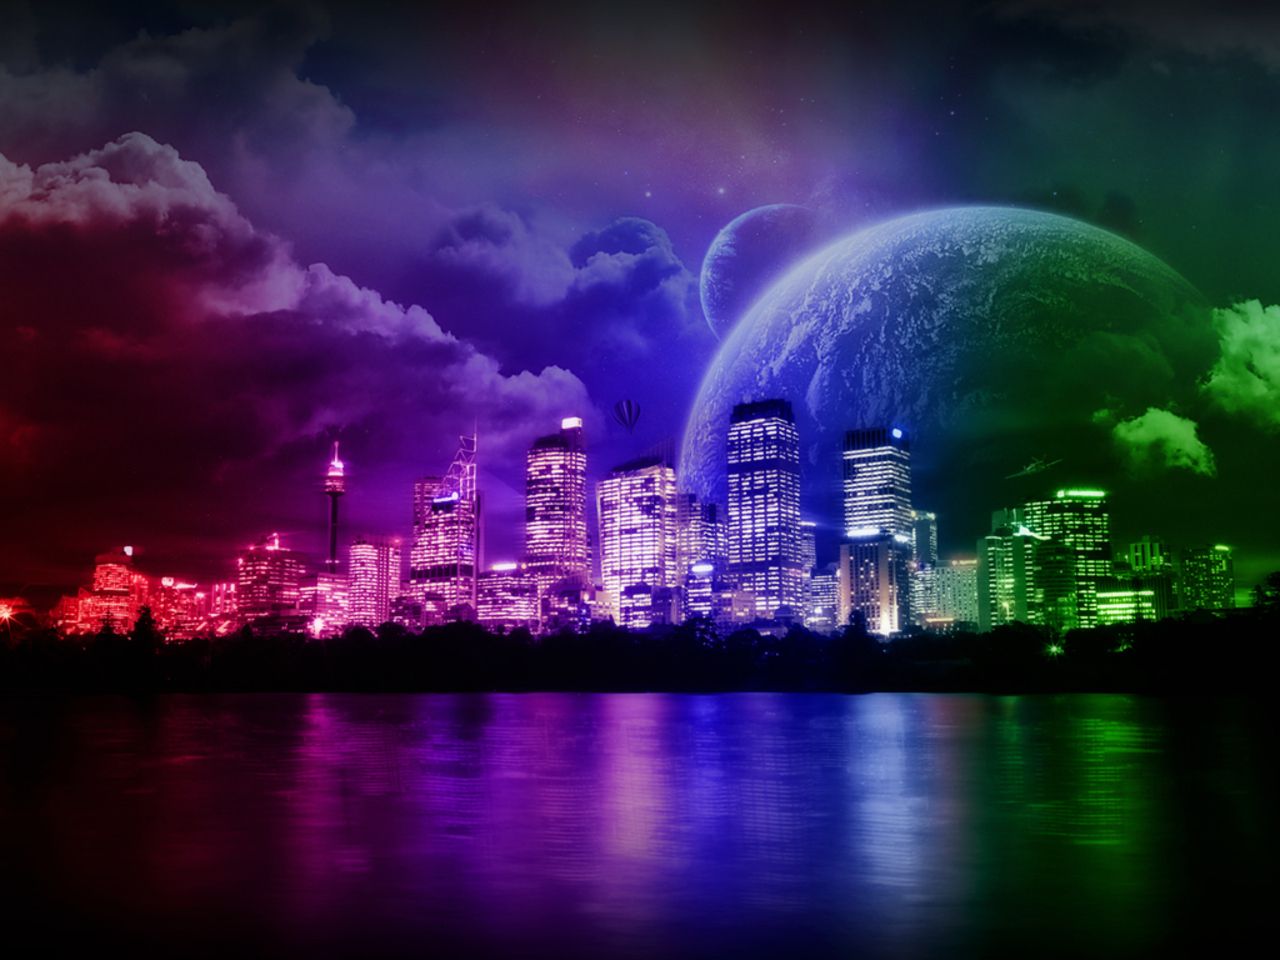 Bright Colors Wallpaper: Cosmic Colors. Rainbow city, Pretty background, Night city